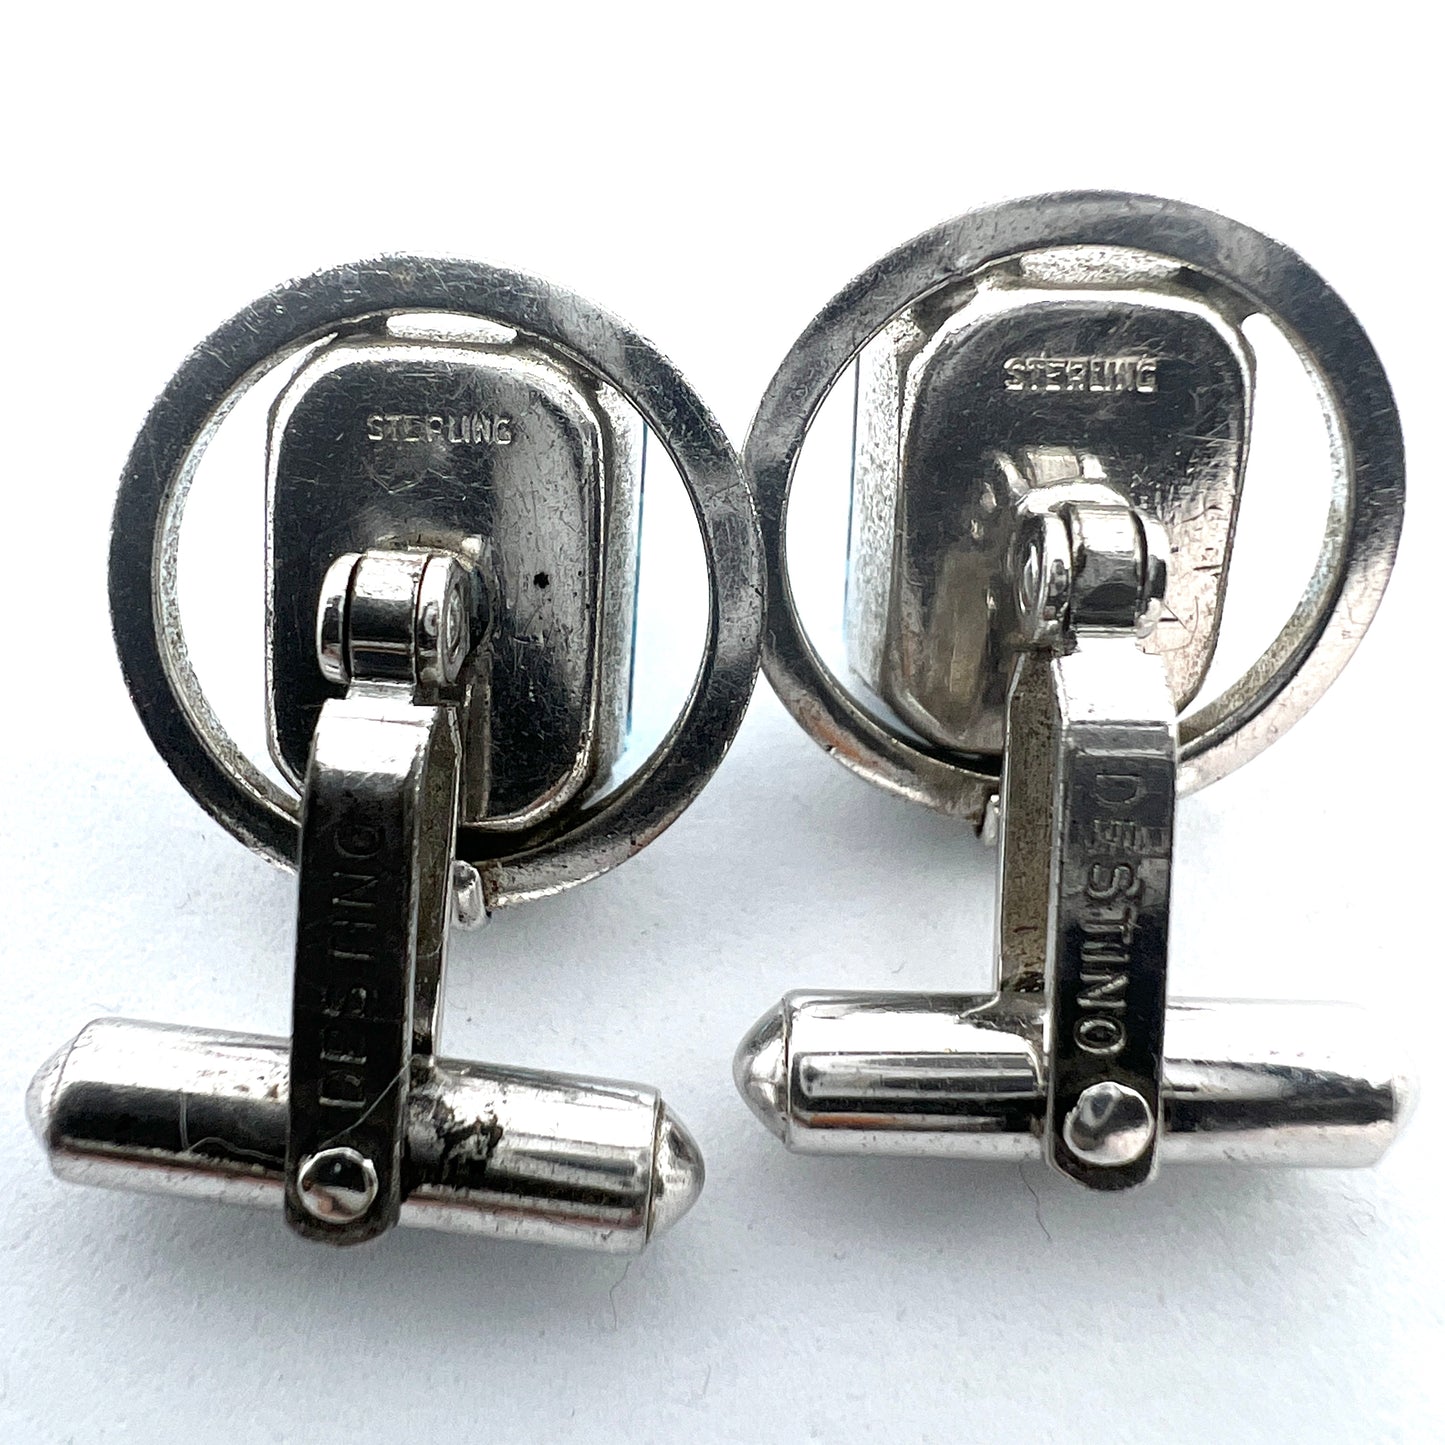 Phil Janzé and Destino. Two Pair of Silver Cufflinks.